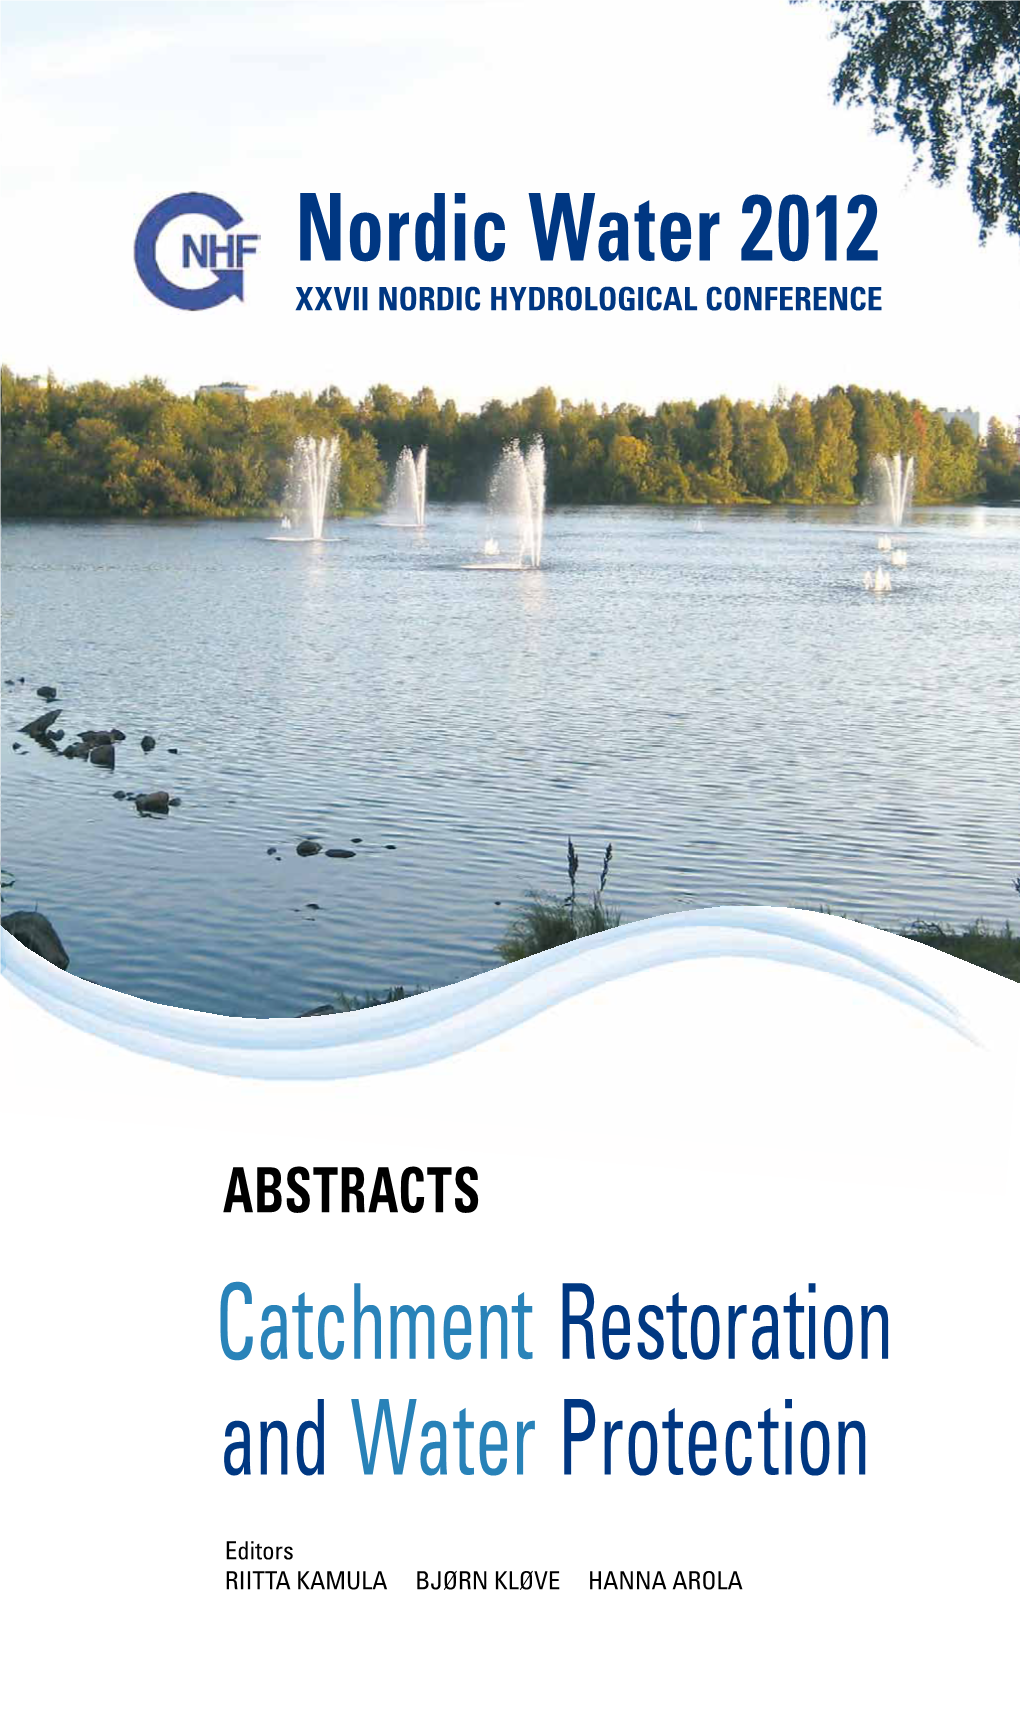 Catchment Restoration and Water Protection